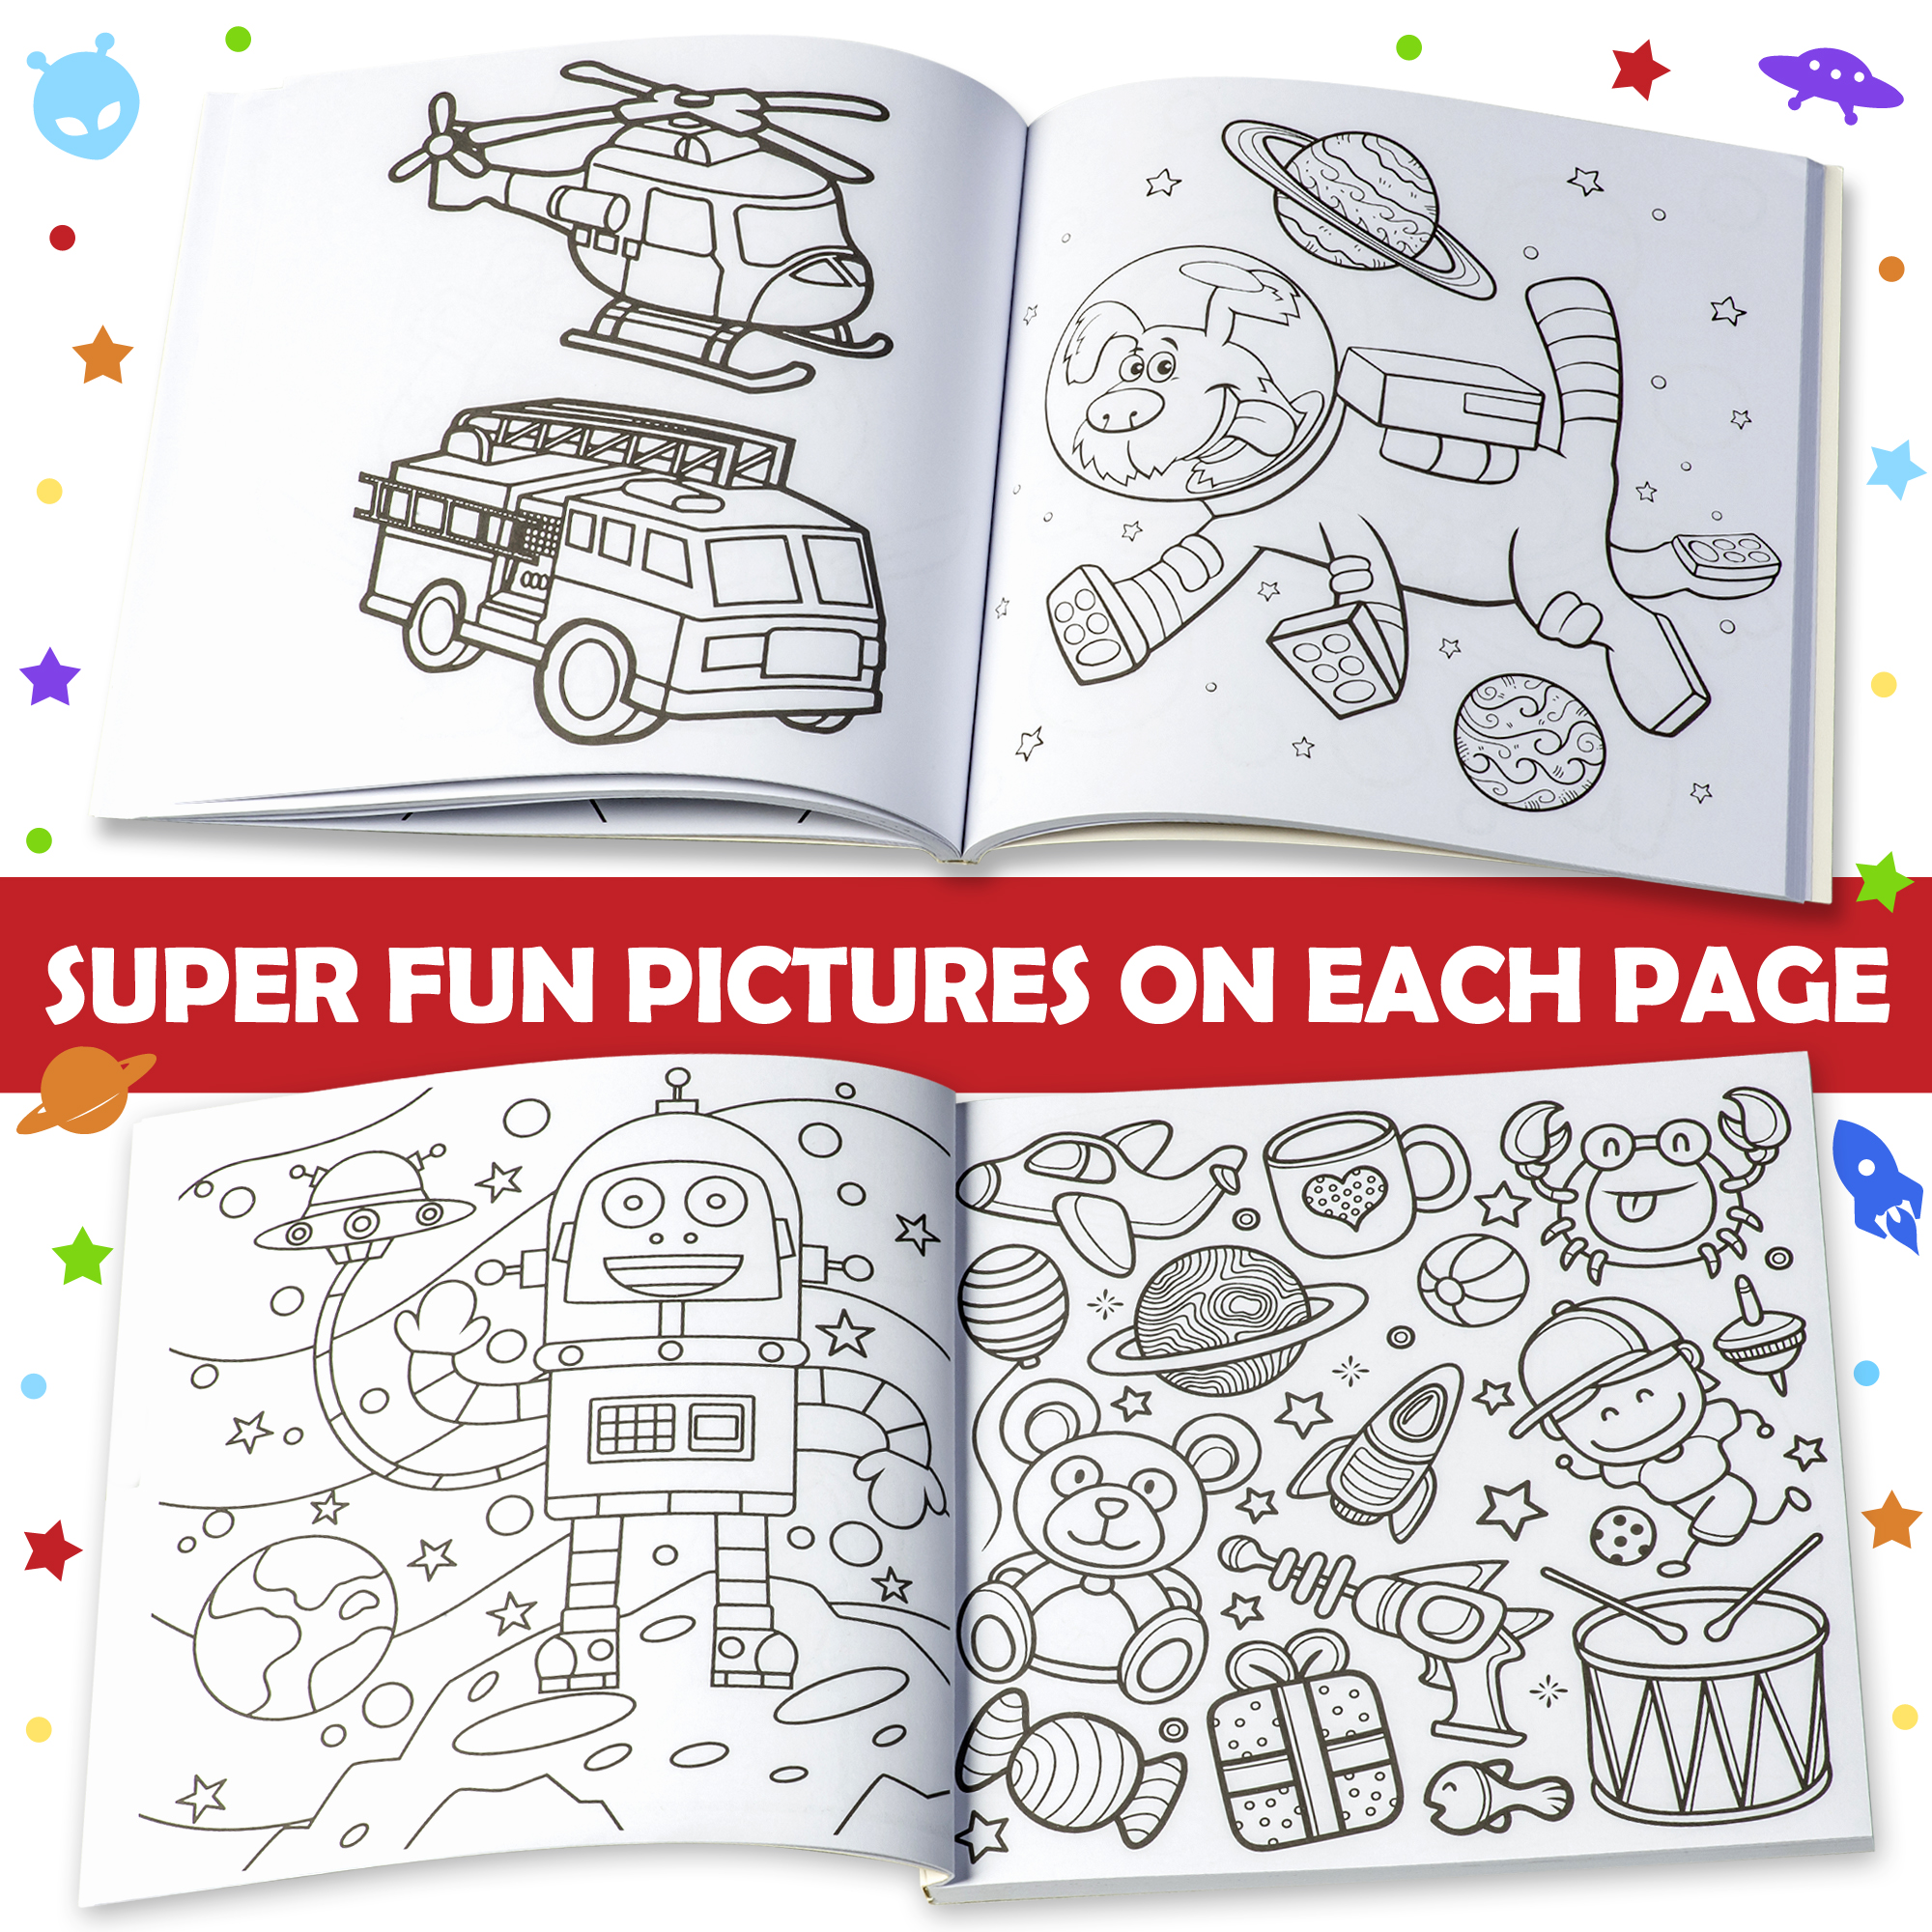 Coloring Books For Boys Ages 8-12: Fun, Easy, and Relaxing